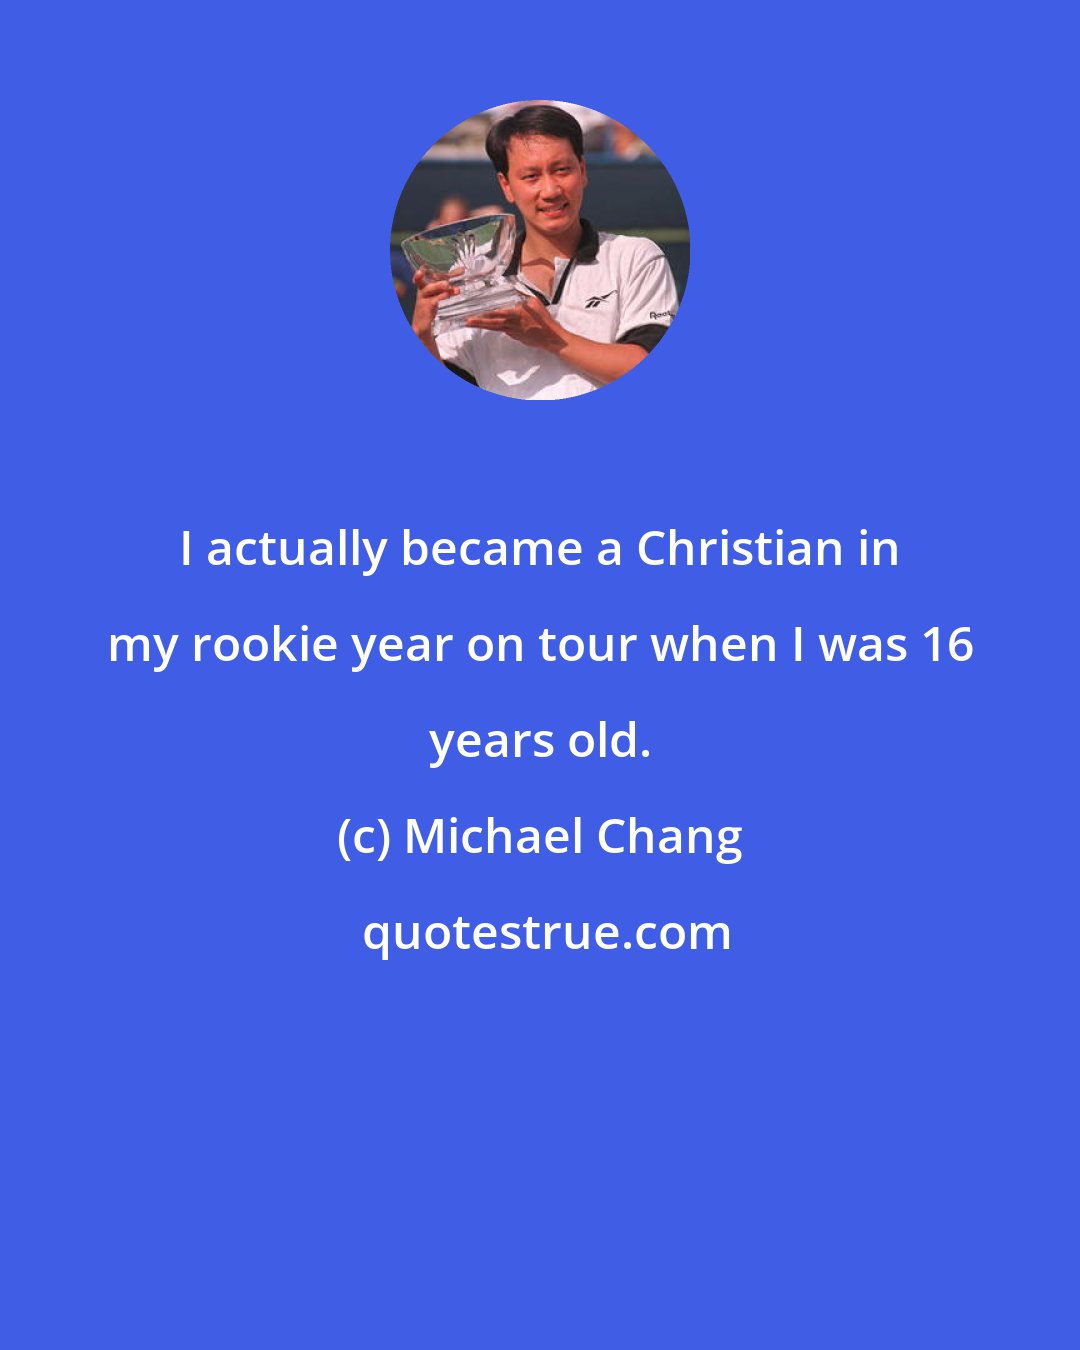 Michael Chang: I actually became a Christian in my rookie year on tour when I was 16 years old.